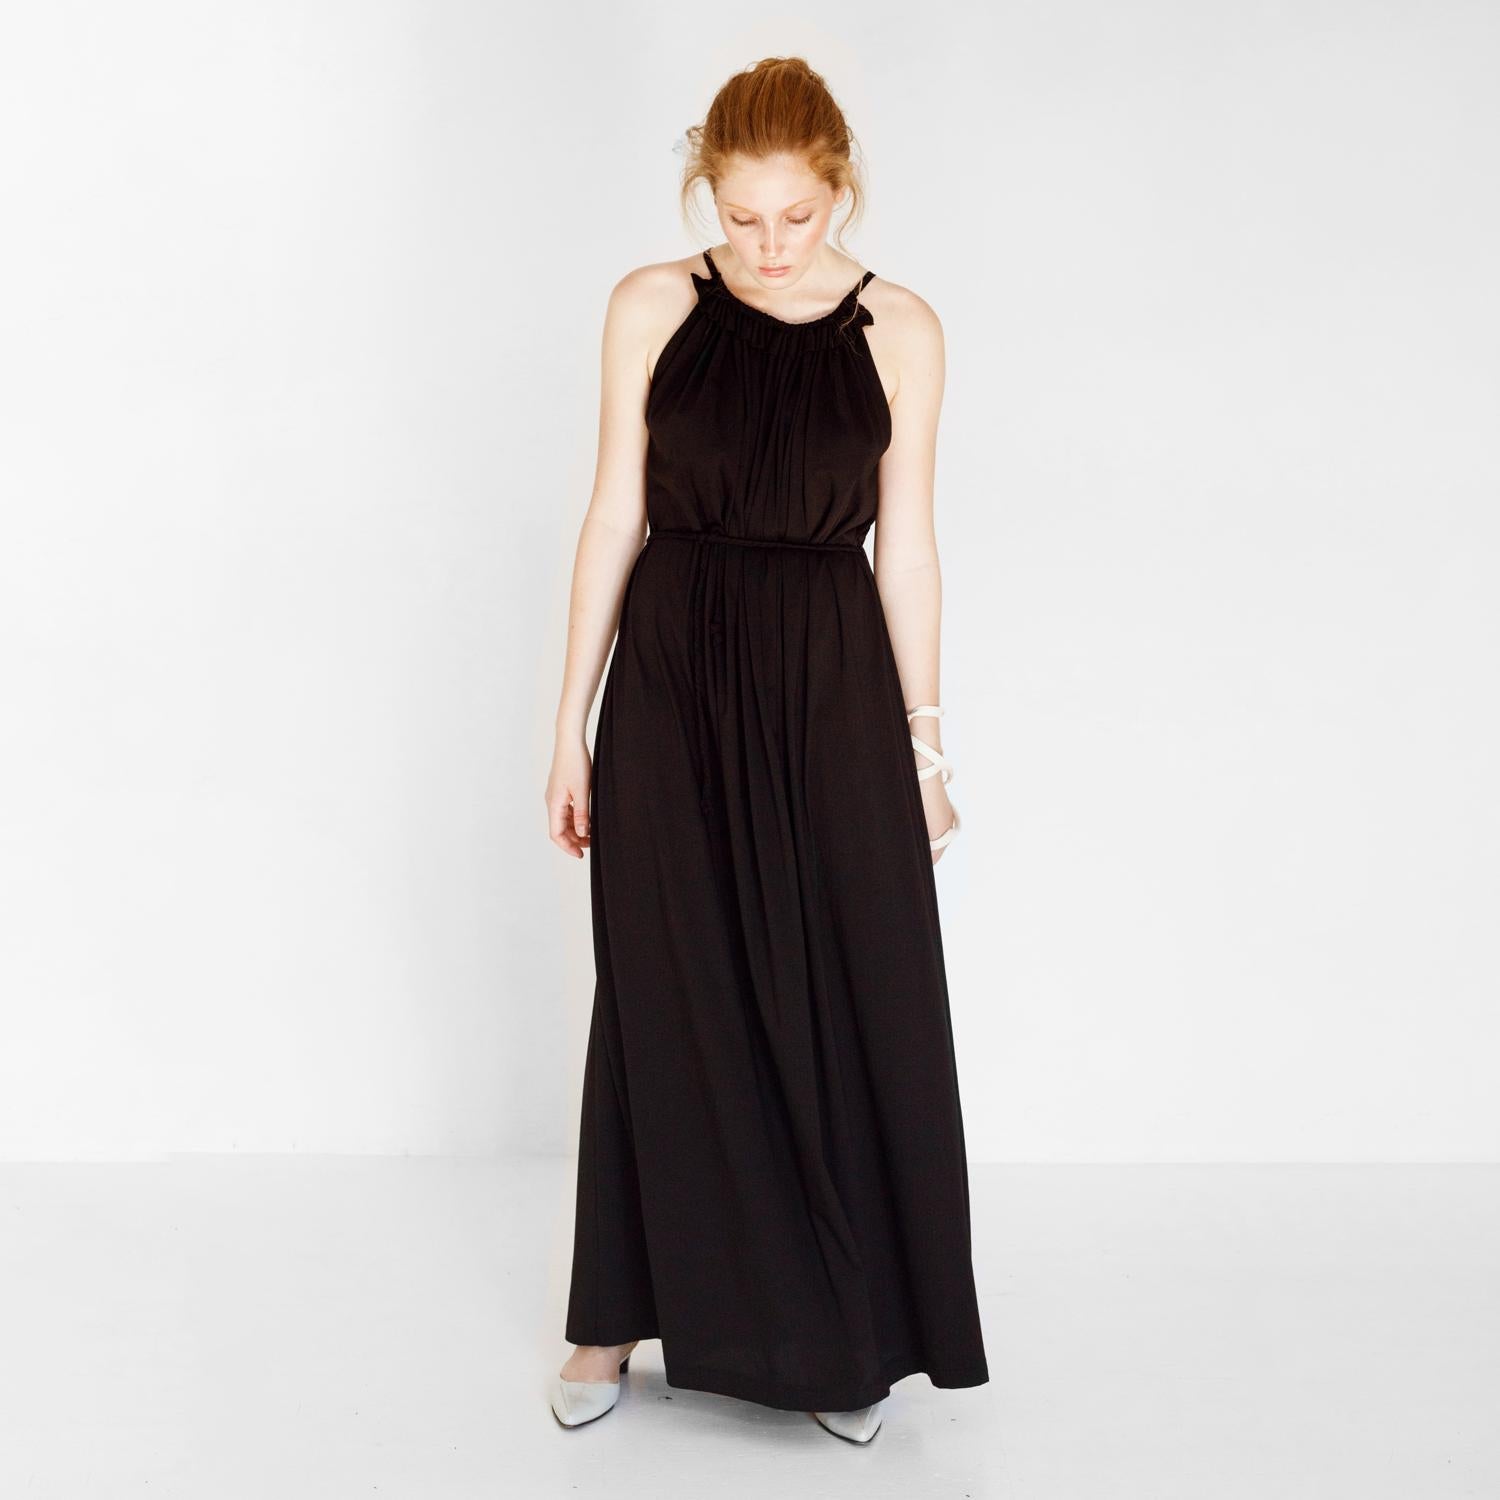 Elegant jersey dress in black made from organic cotton